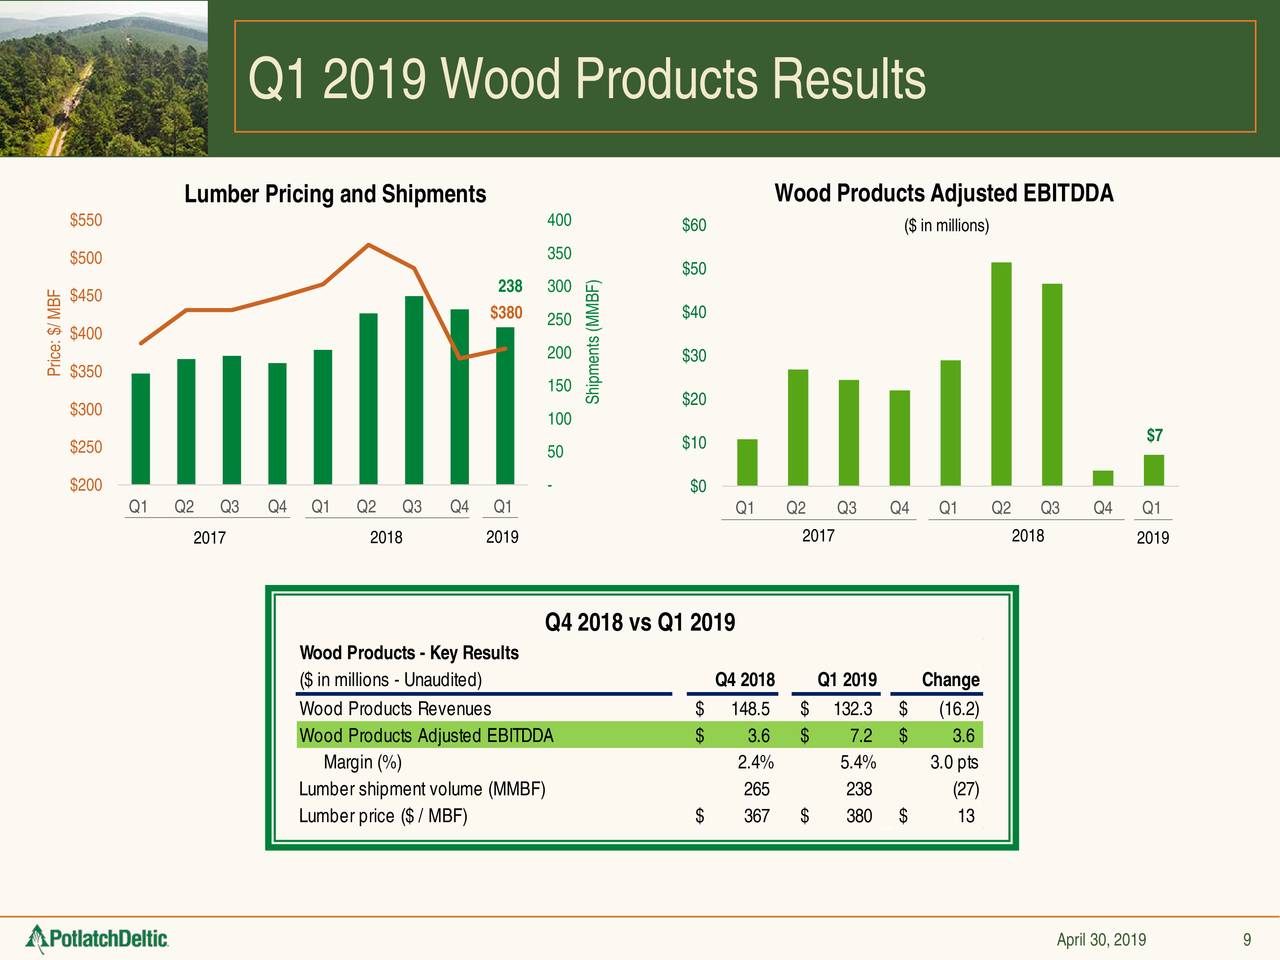 Q1 2019 Wood Products Results